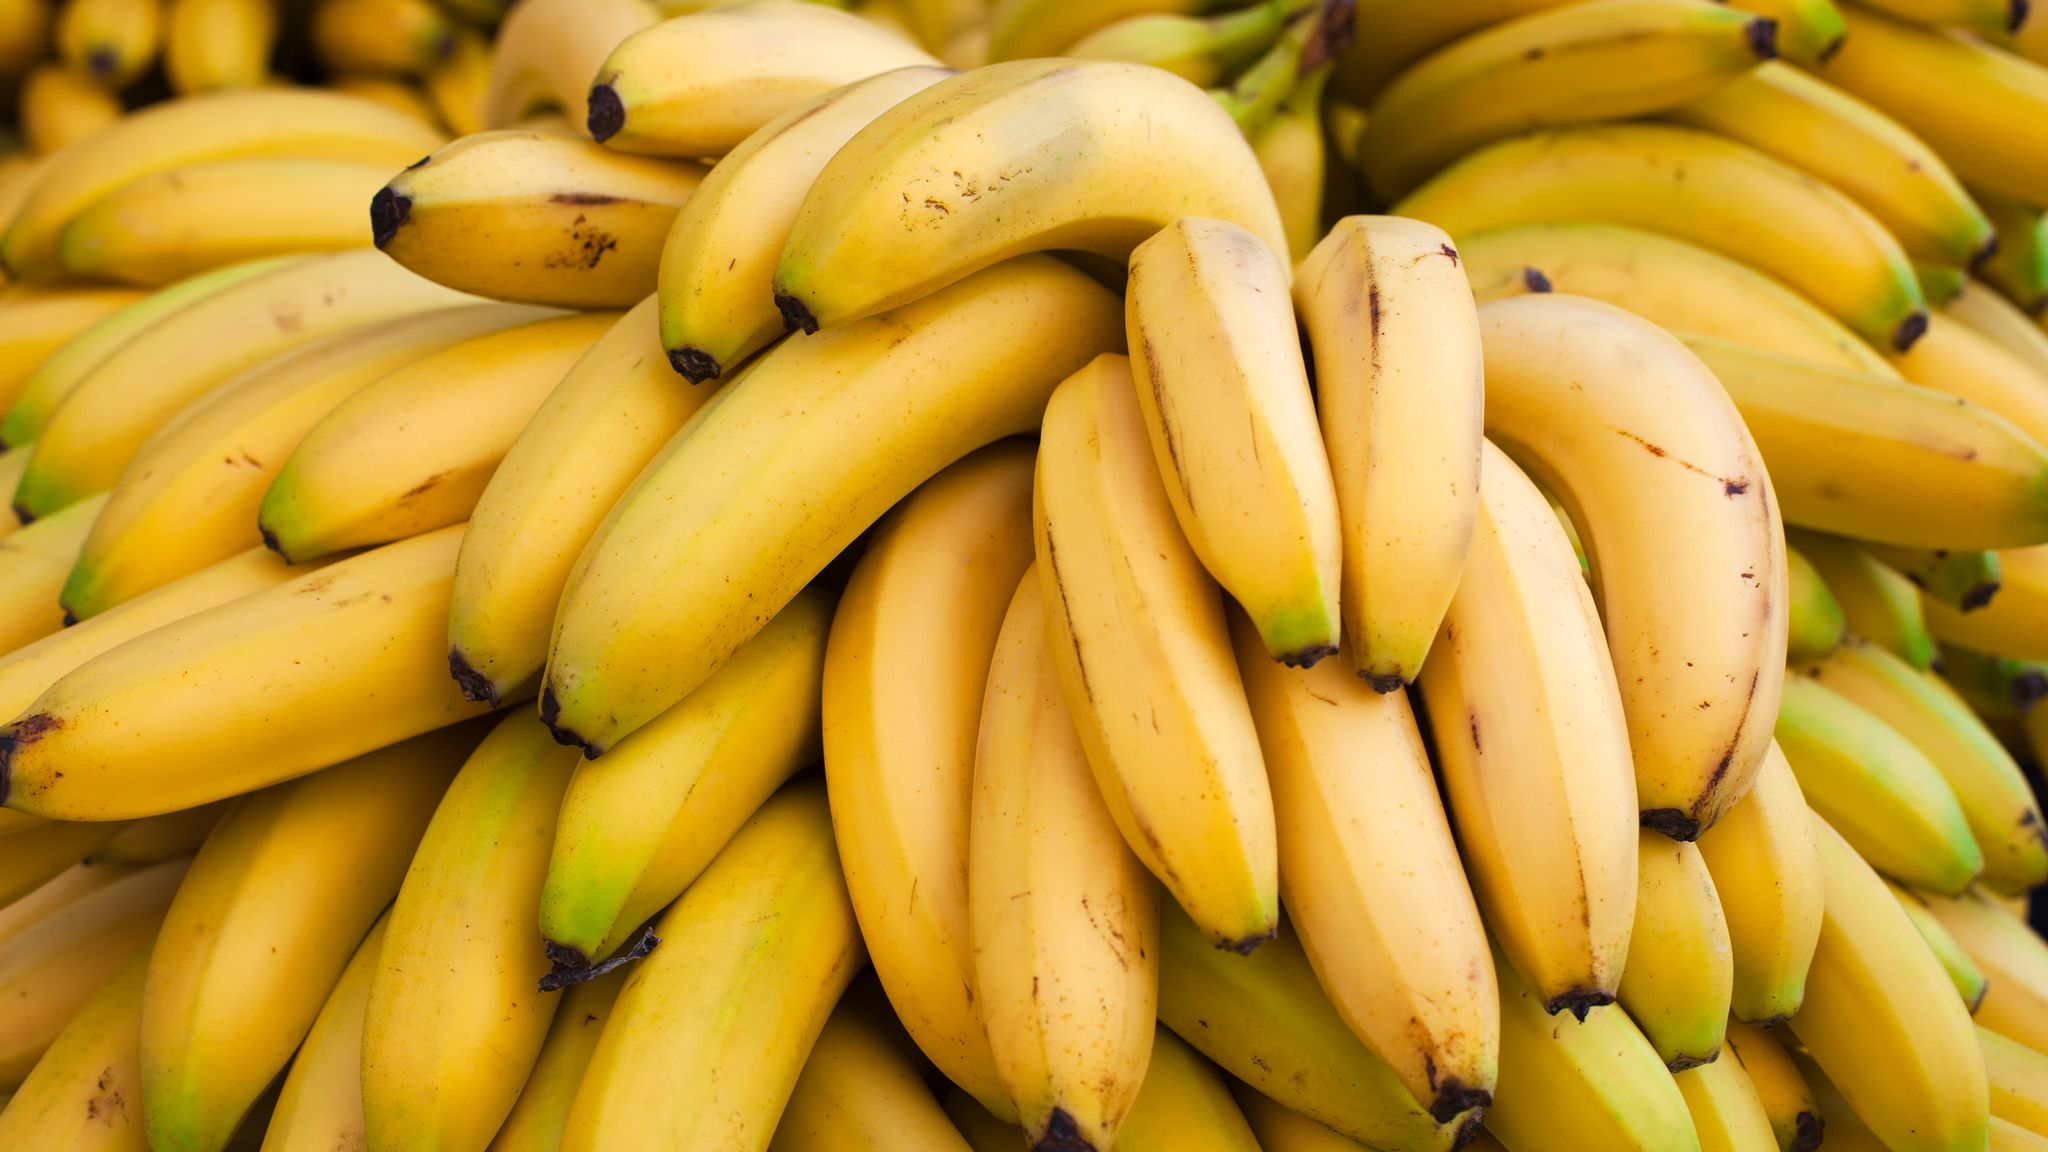 Banana: A Guide to Growing and Irrigating Economically